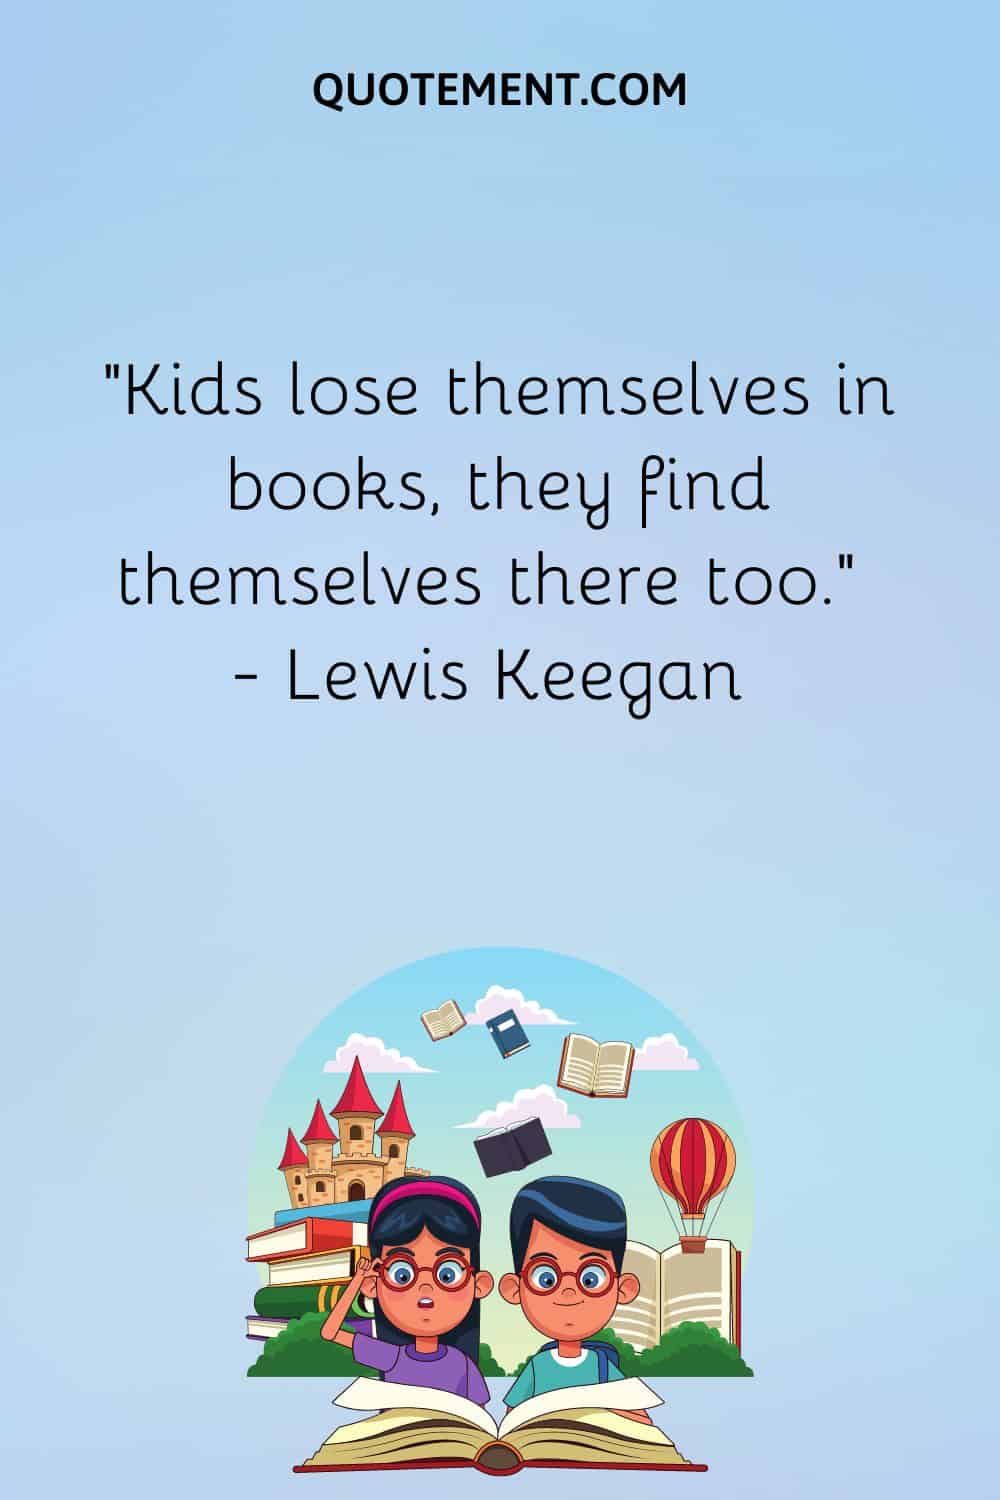 “Kids lose themselves in books, they find themselves there too.” — Lewis Keegan